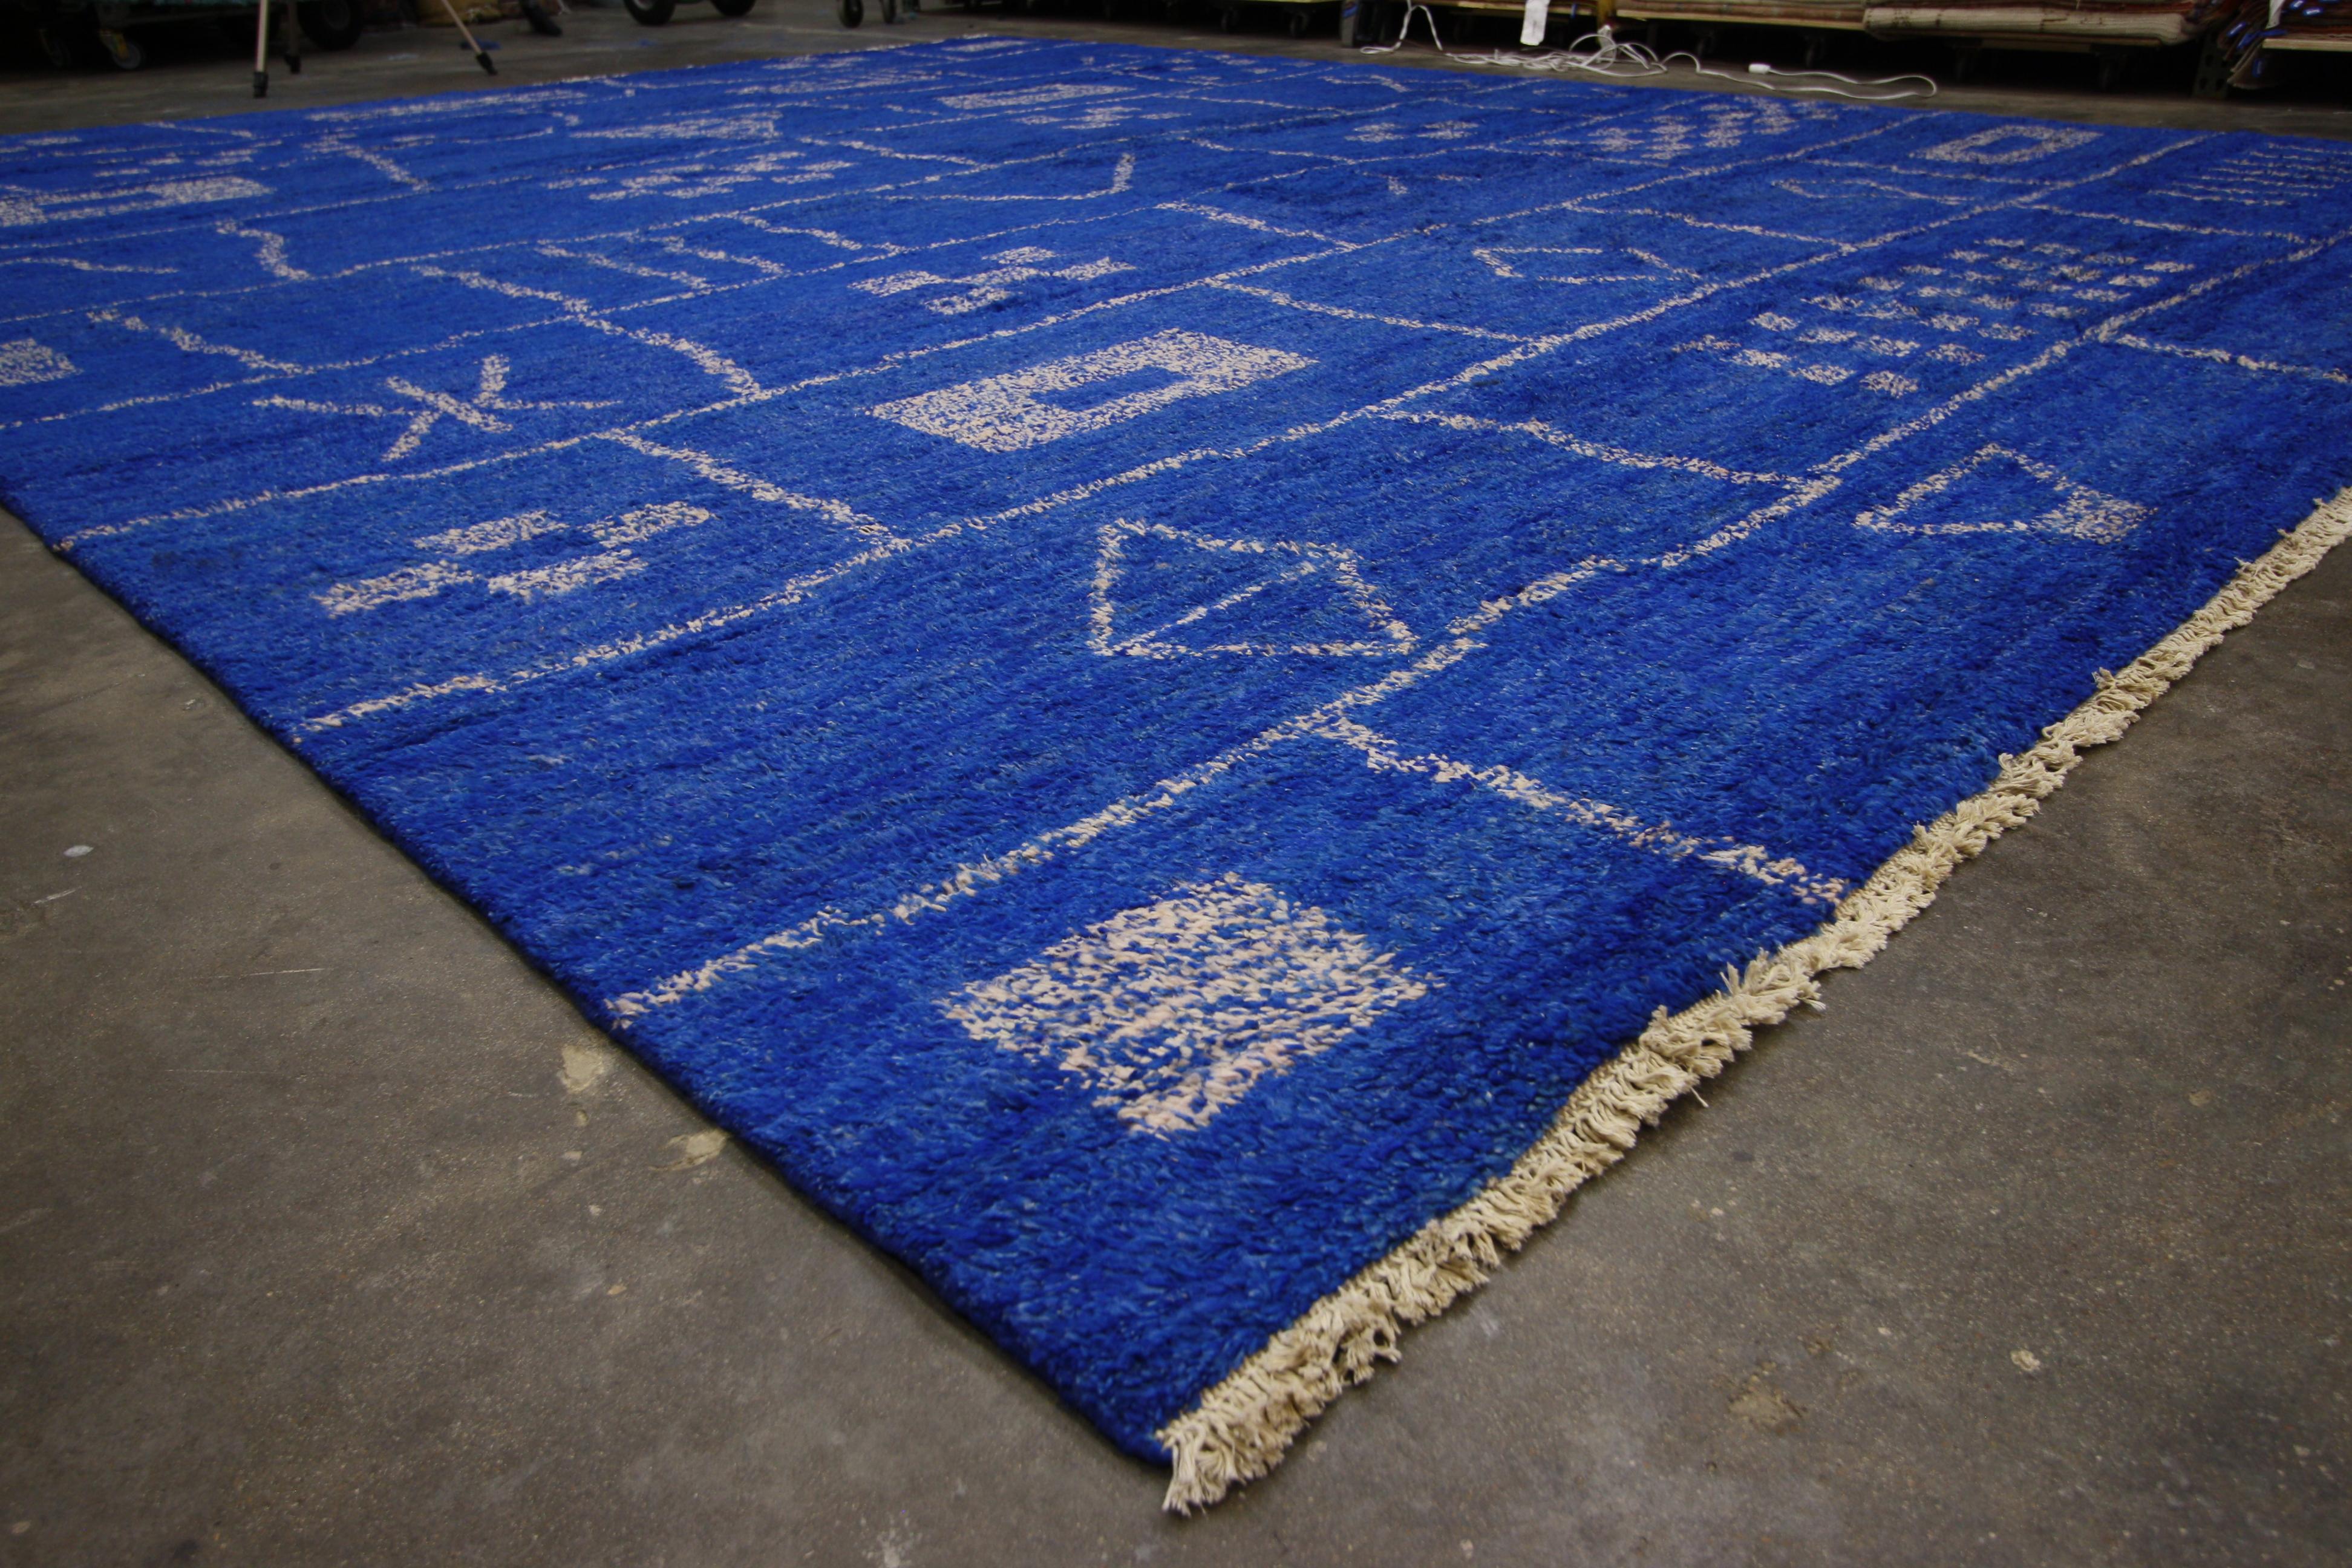 80365 Contemporary Blue Moroccan Area Rug with Modern Bauhaus Style. This hand knotted wool contemporary Moroccan area rug with features ambiguous organic shapes in different sizes. The tribal symbols of diamonds, fused triangles, X-shapes,